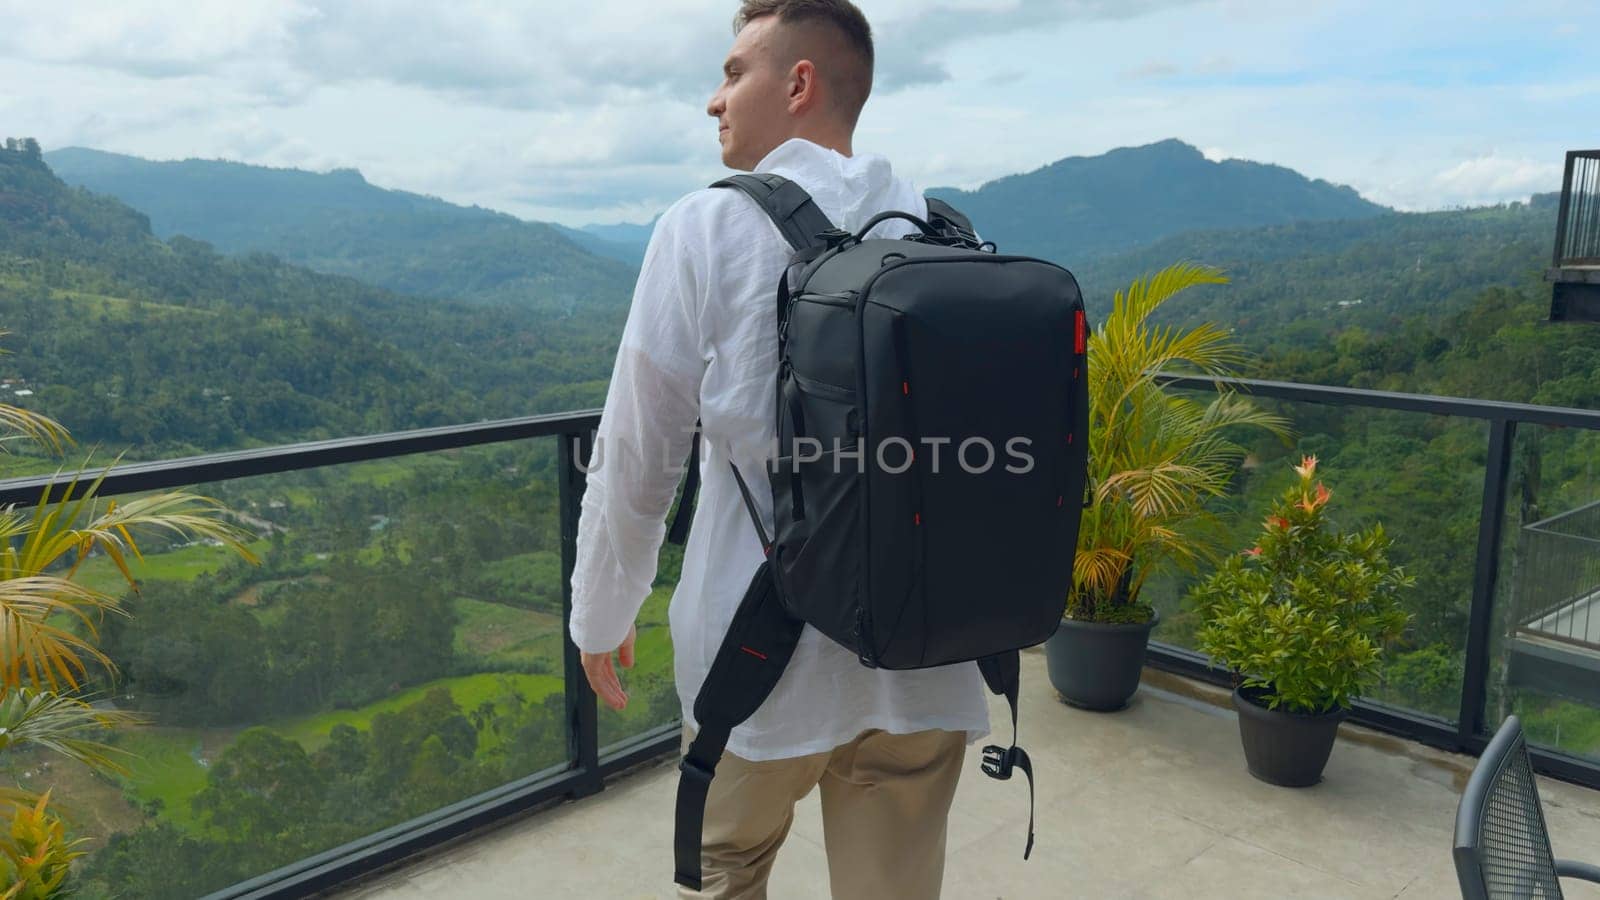 Man with view of tropical mountain valley. Action. Man on observation deck in tropical mountains. Man with backpack on sightseeing attraction overlooking green mountains.